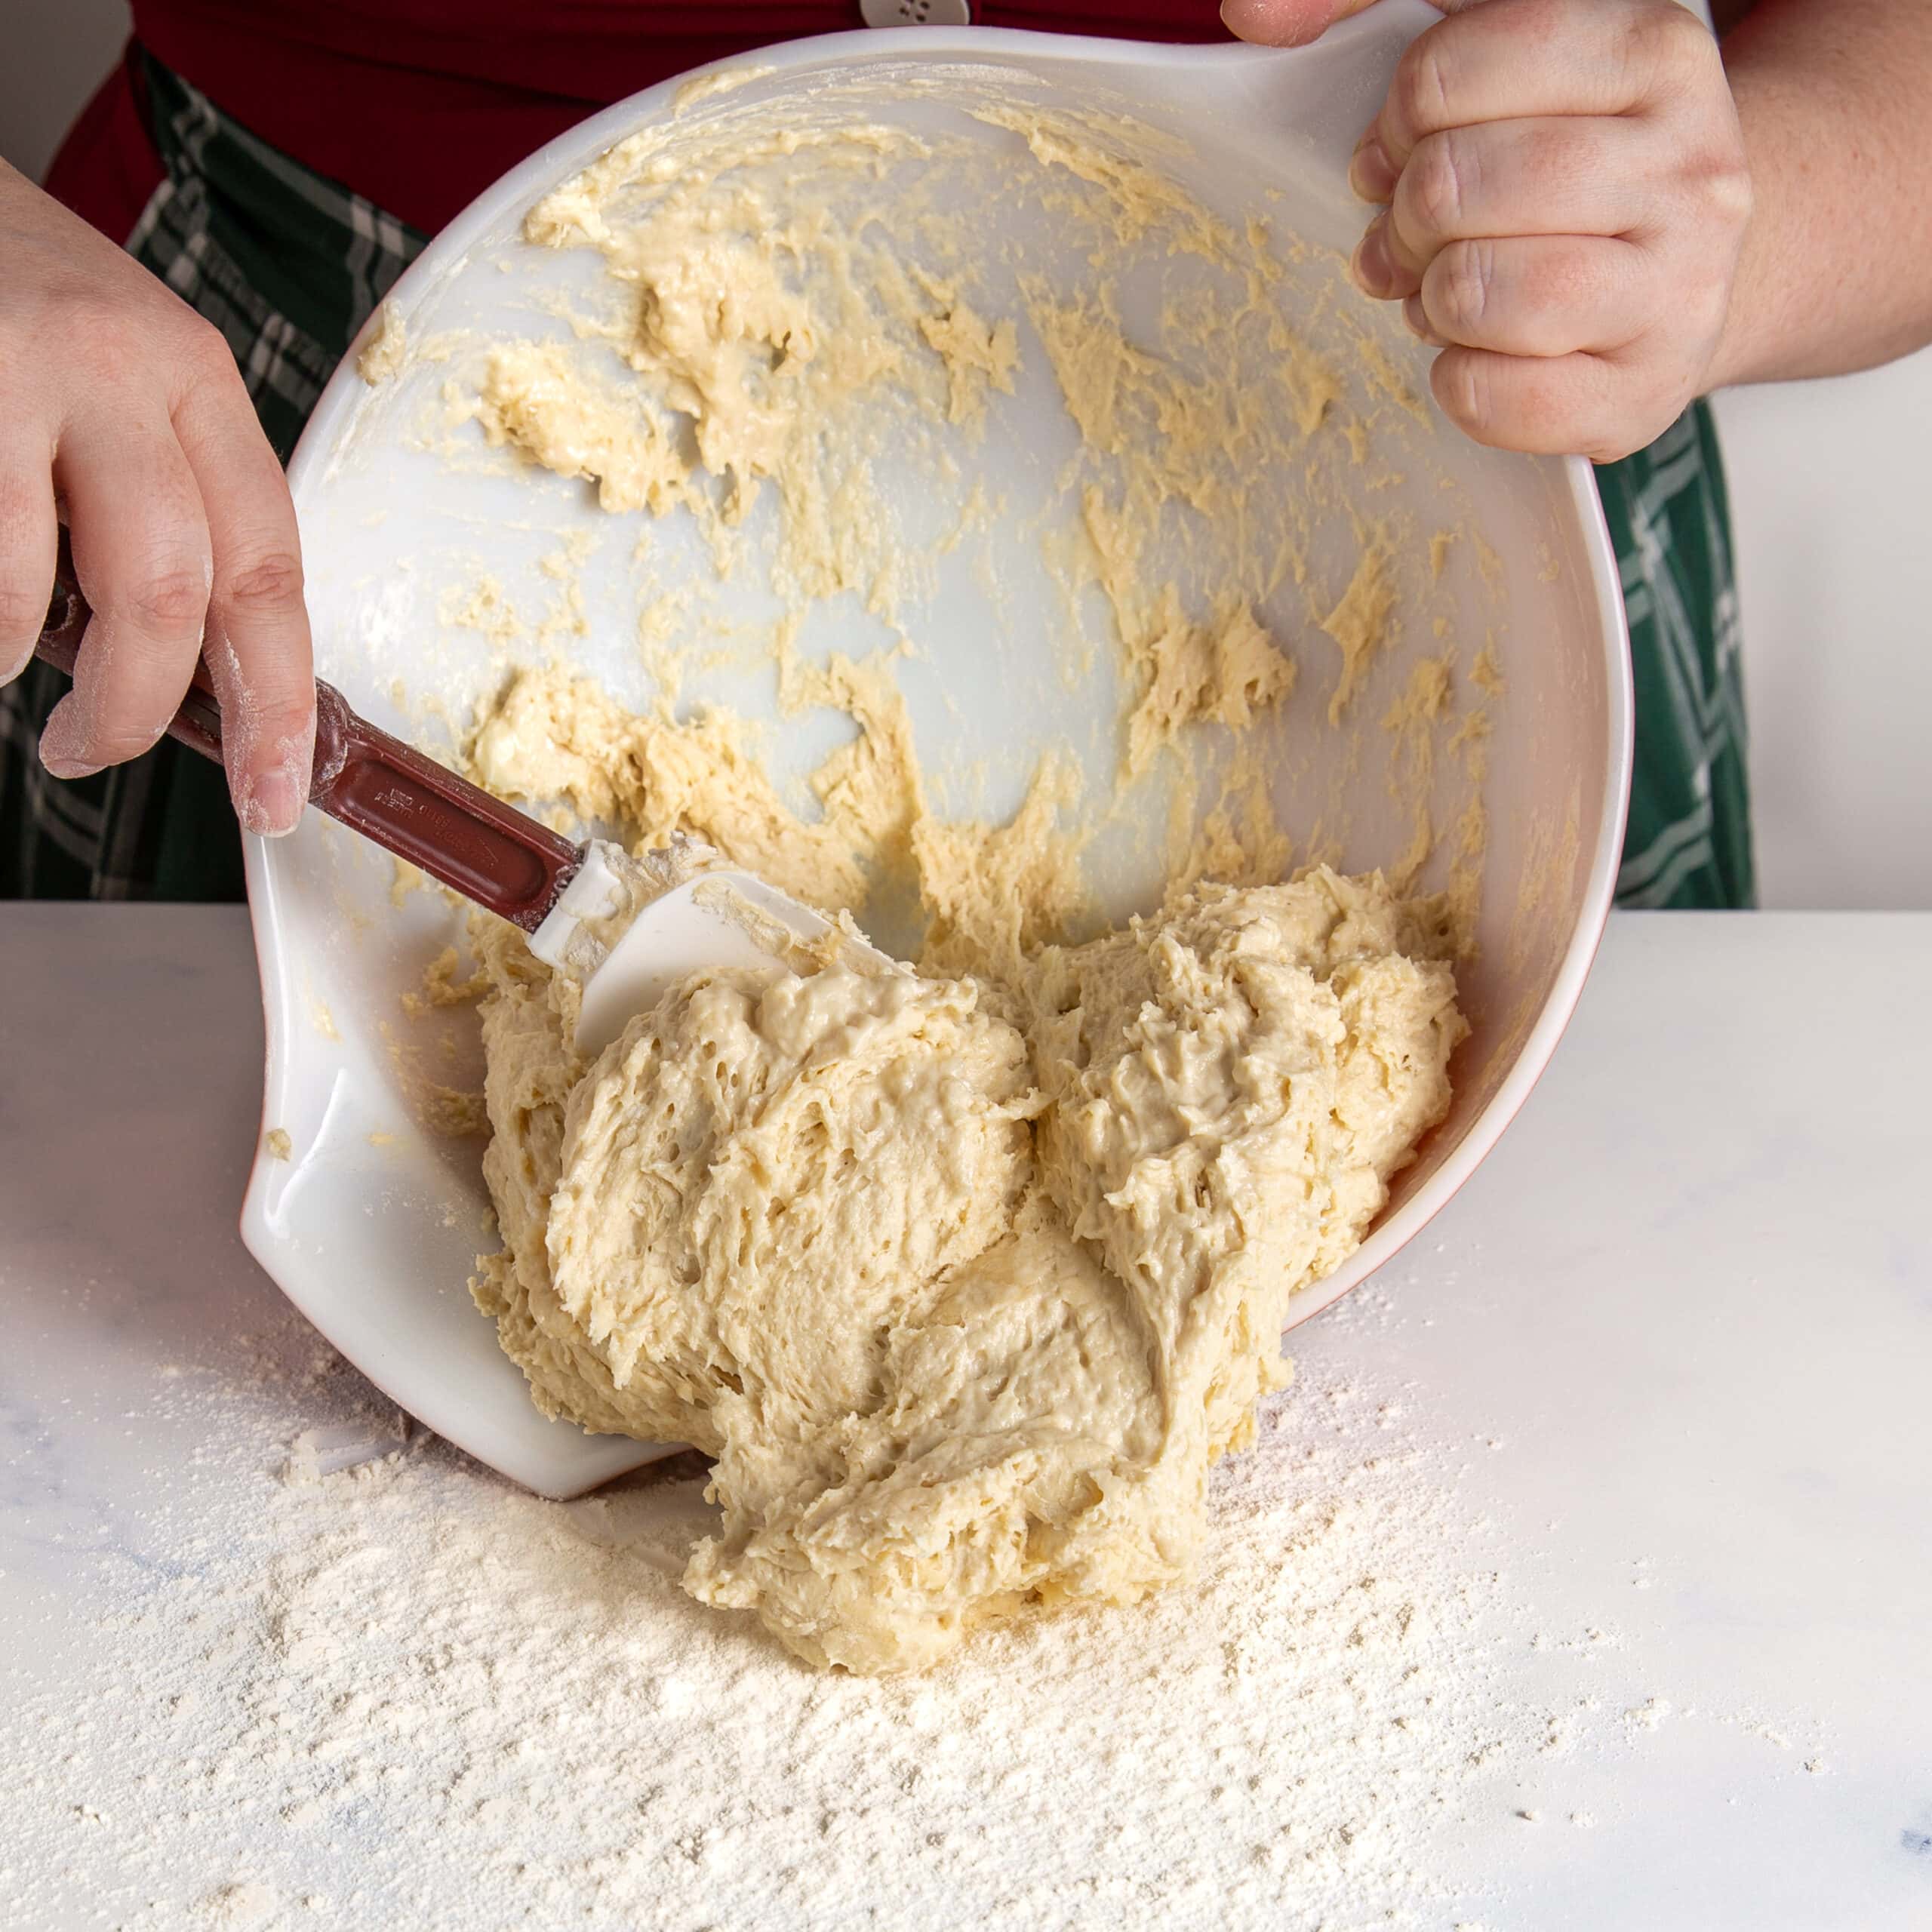 Pouring the dough out onto the counter